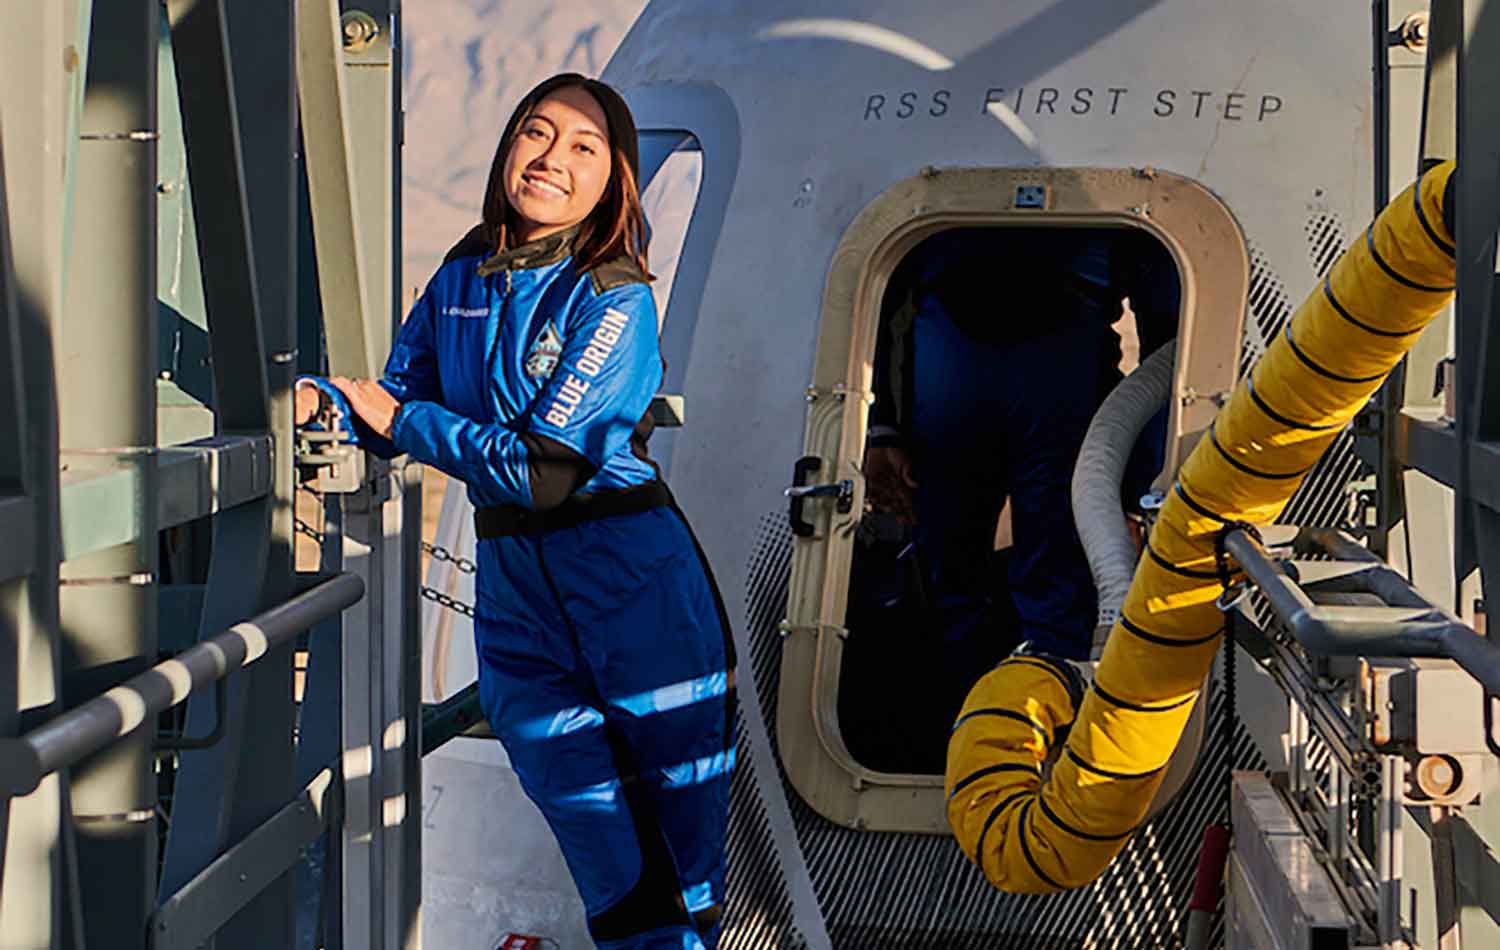 A woman in a blue Blue Origin space suit poses outside of a space capsule.